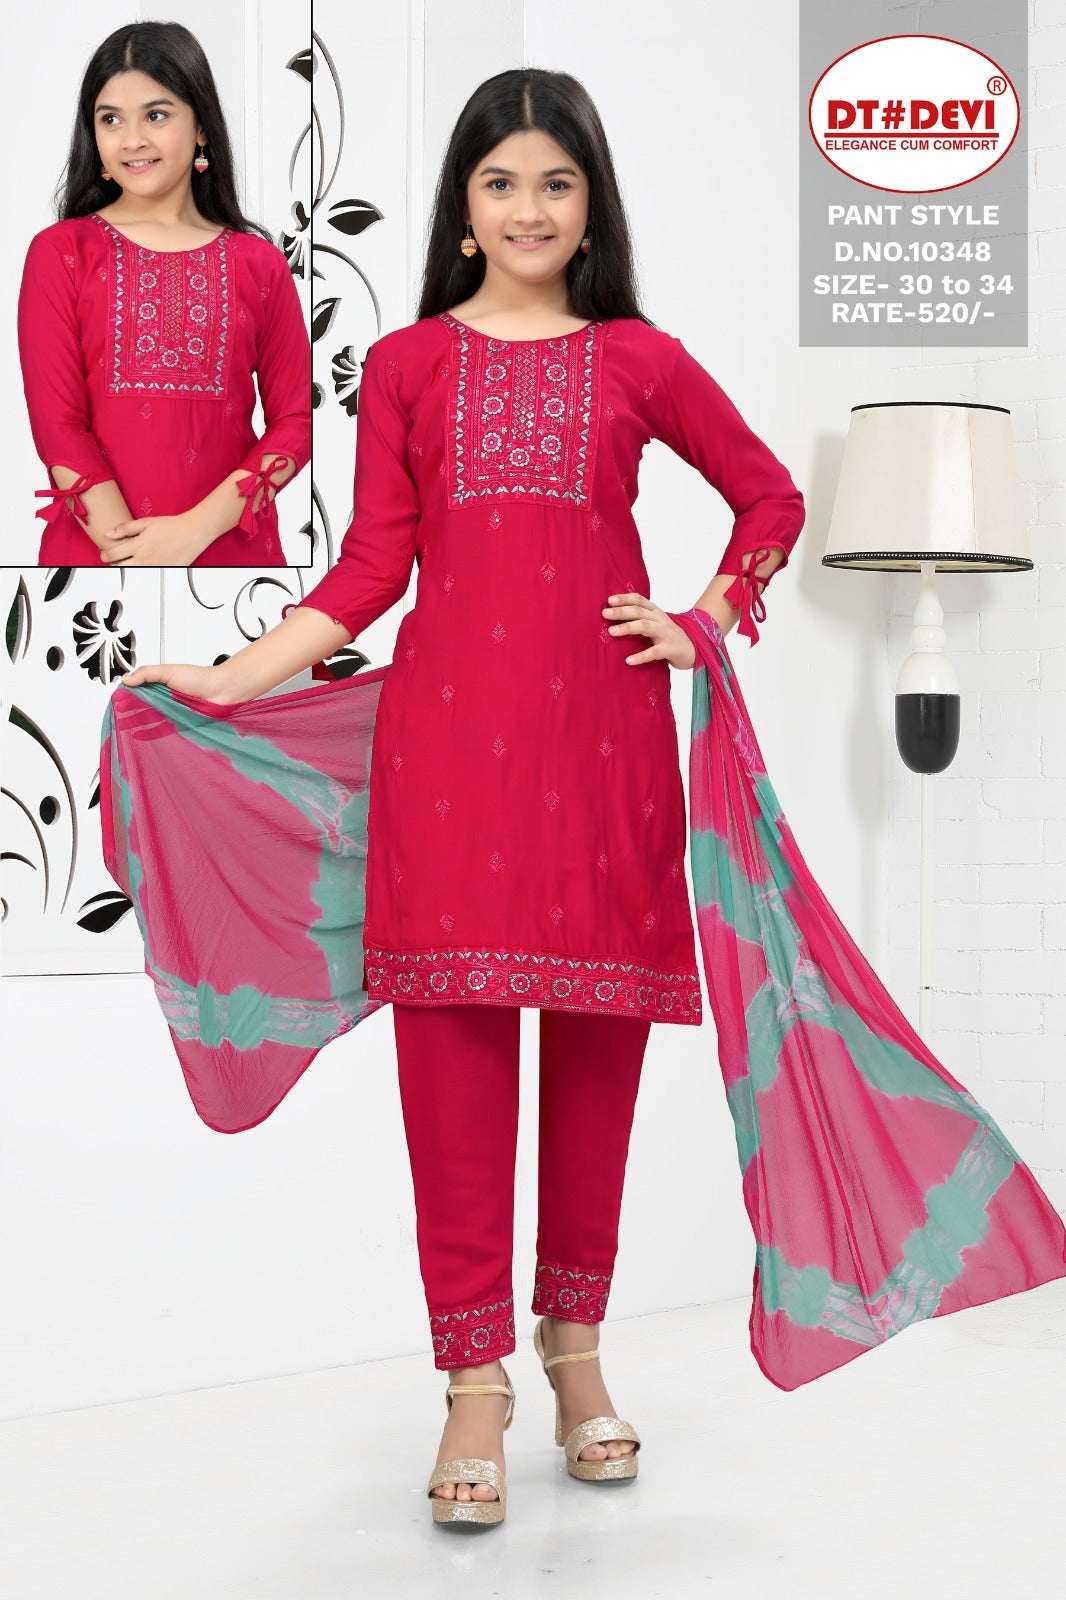 10348 Dt Devi Silk Girls Readymade Pant Suits